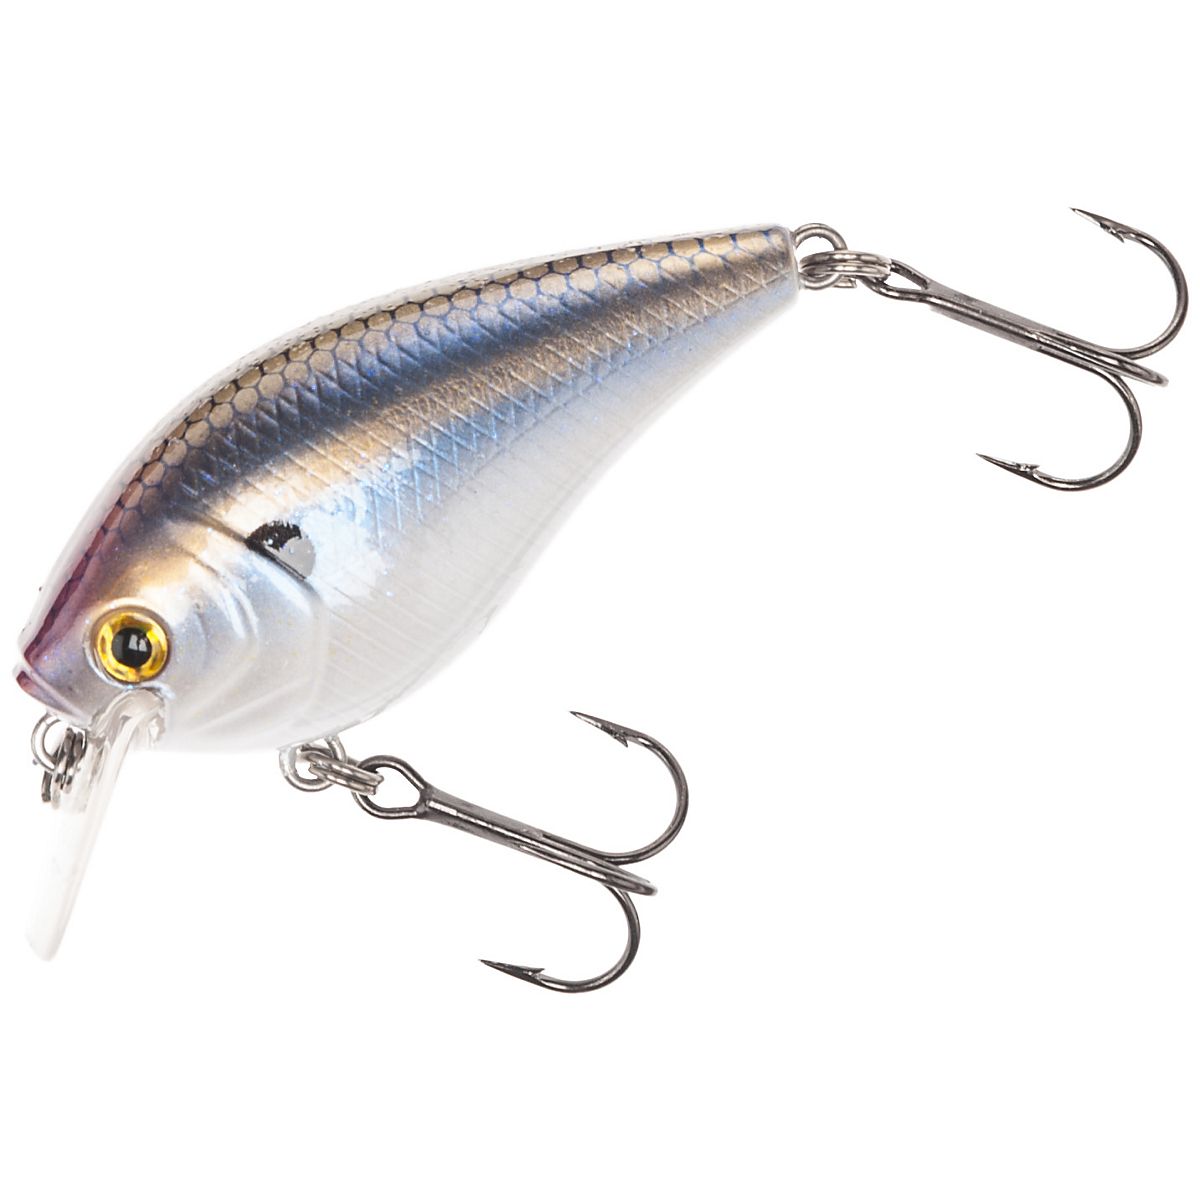 Details about   H2O Express Square Bill Crankbait Bass Fishing Lure 